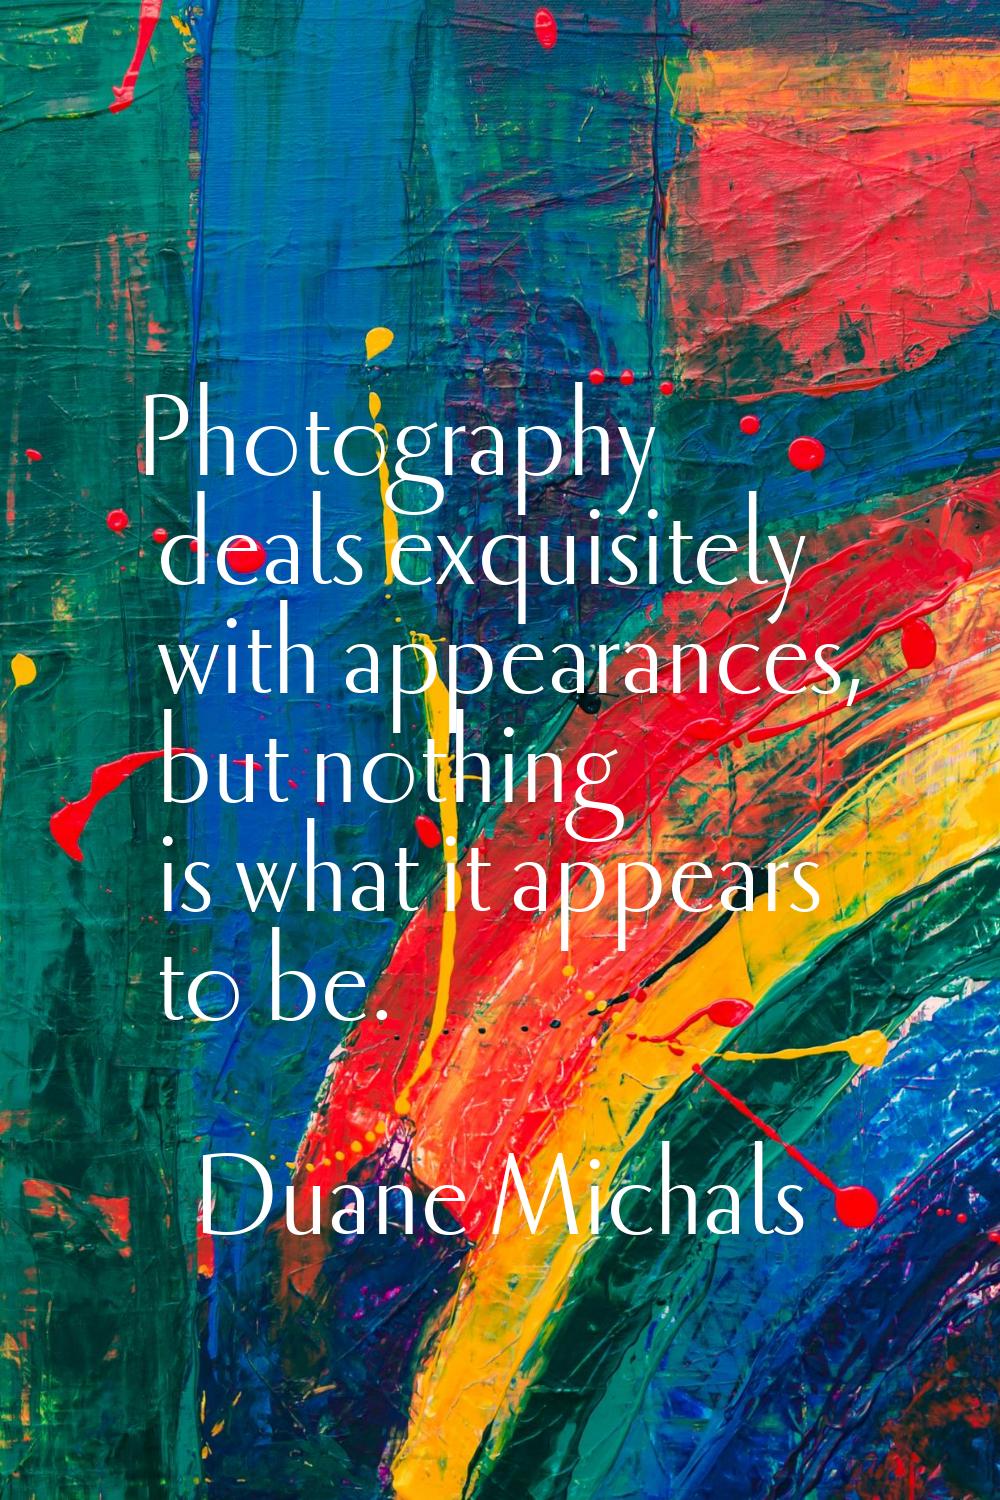 Photography deals exquisitely with appearances, but nothing is what it appears to be.